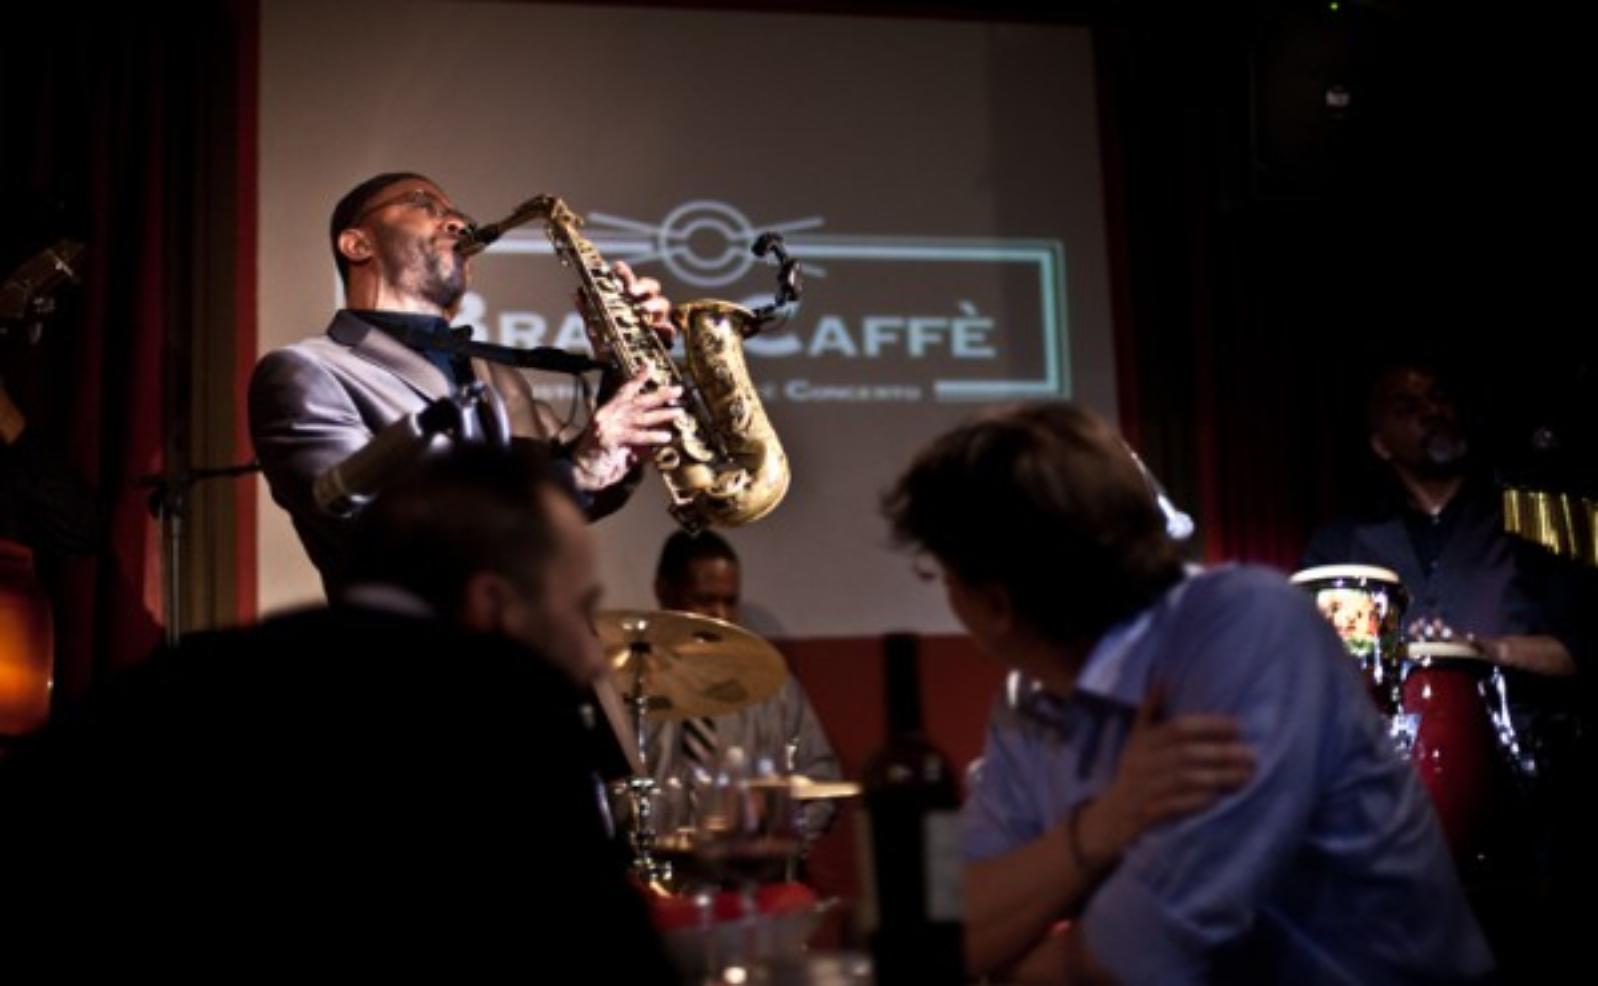 Bravo Caffé - Live concerts in March 2018